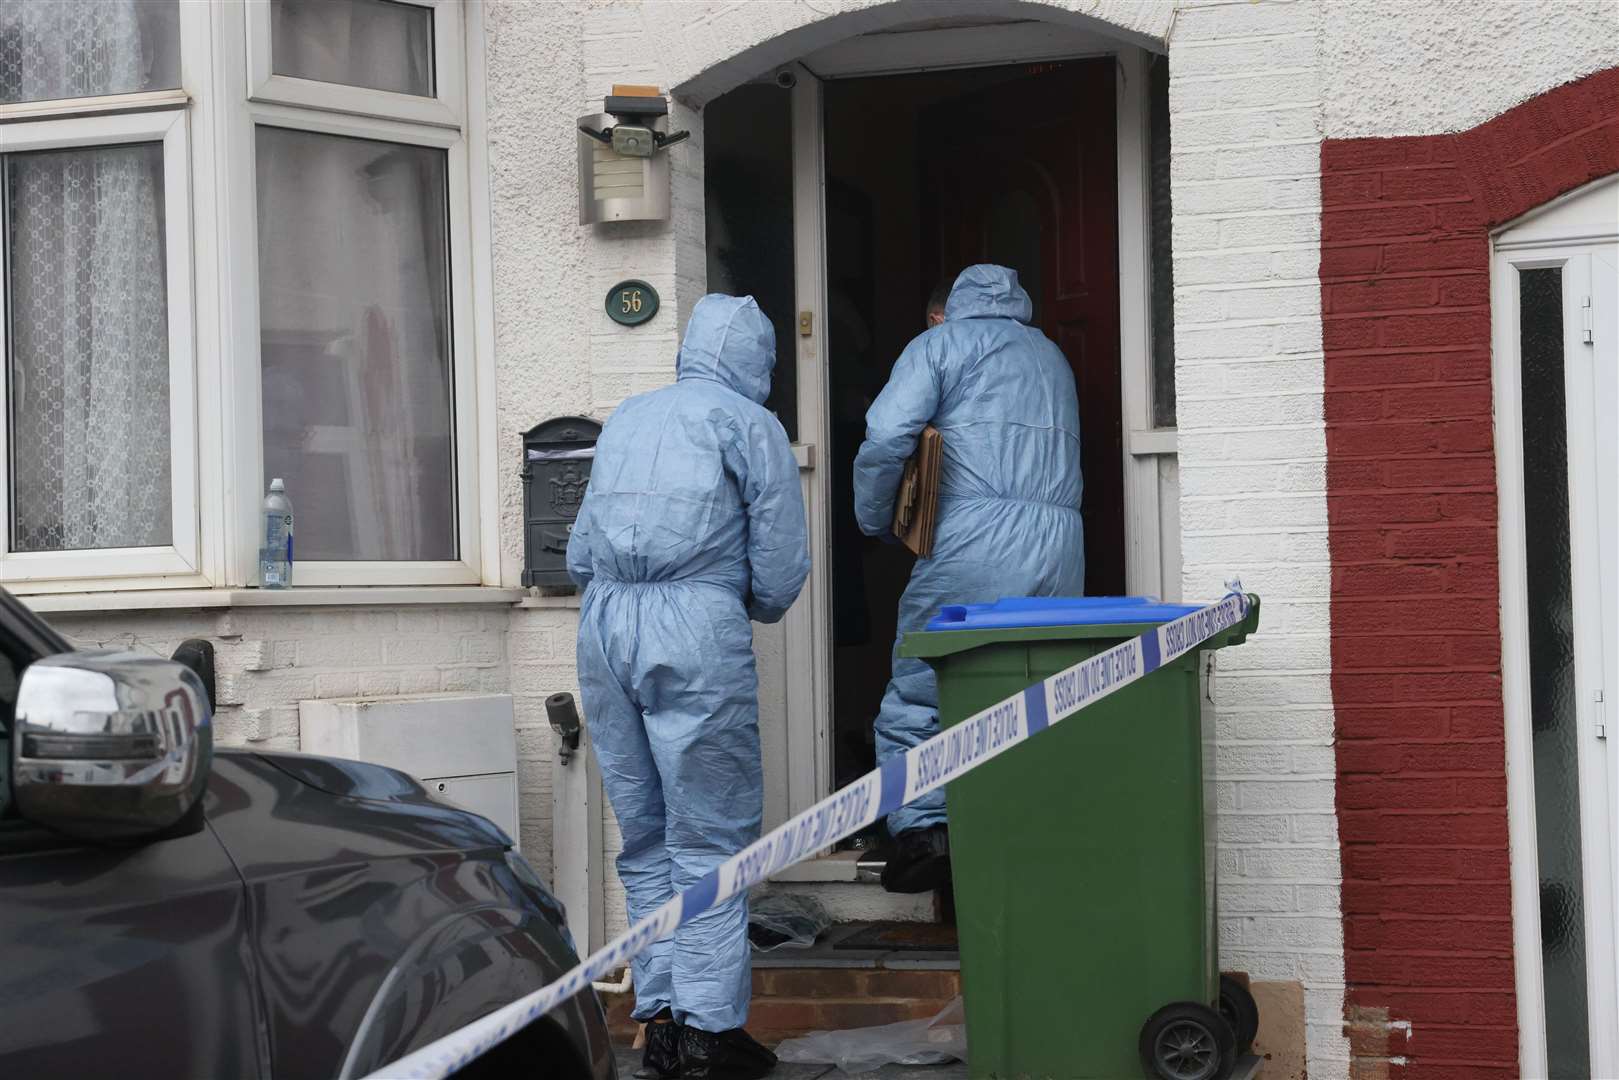 Officers were called to a property in Belvedere at around 11.50am on Thursday. Picture: UKNIP